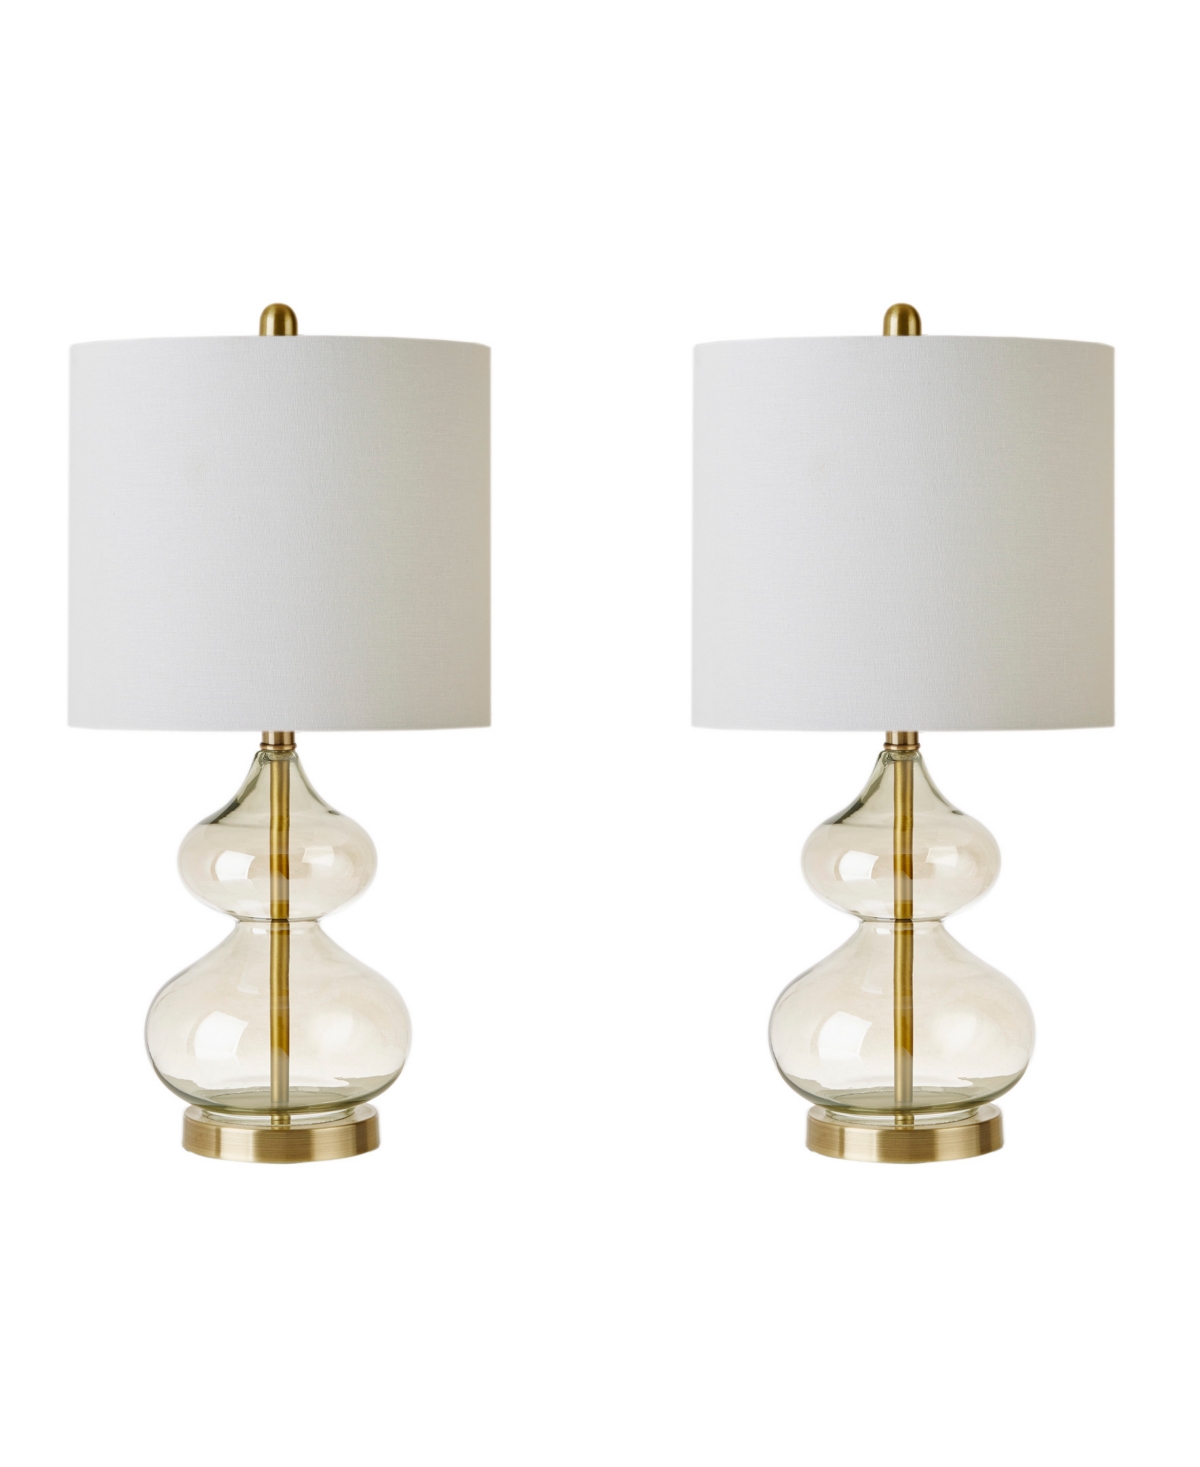 510 Design Ellipse Curved Glass Table Lamp, Set Of 2 In White